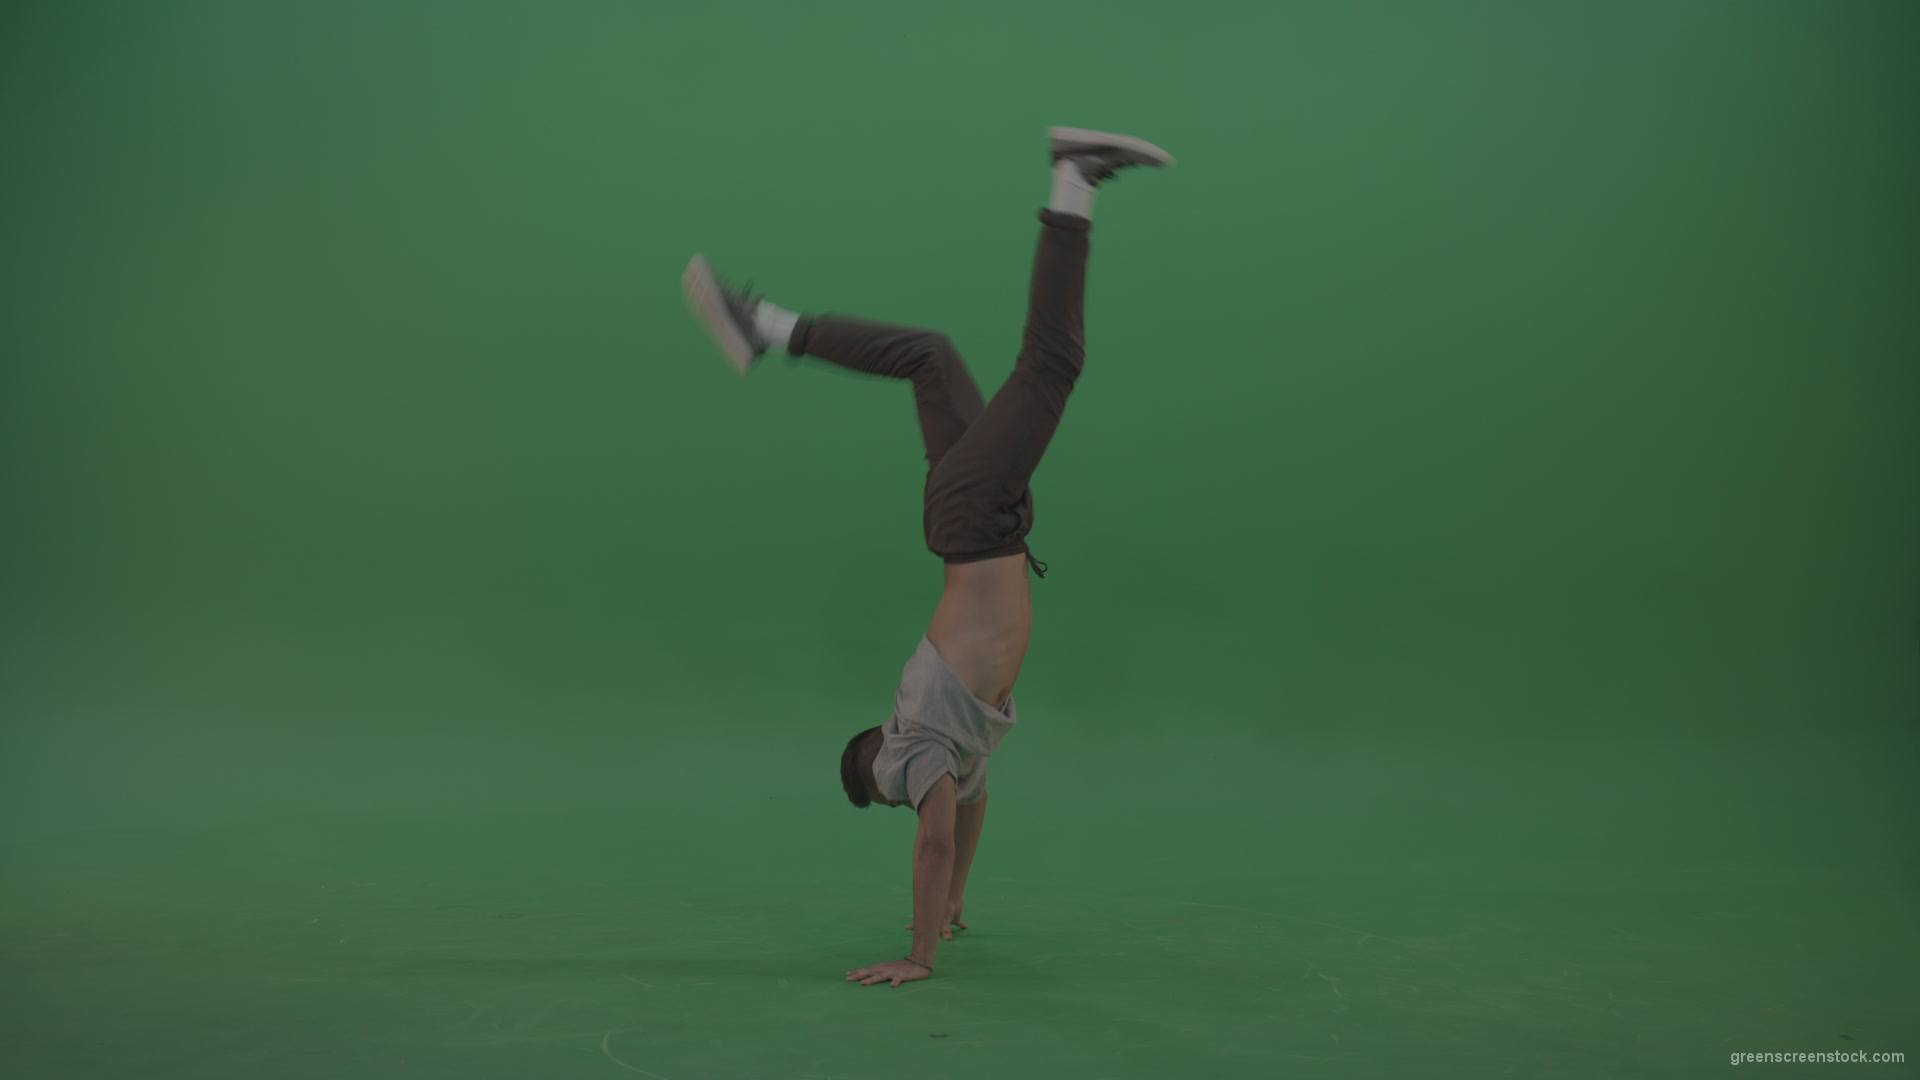 Man-dancing-and-staying-on-hand-on-the-green-floor-green-screen_004 Green Screen Stock